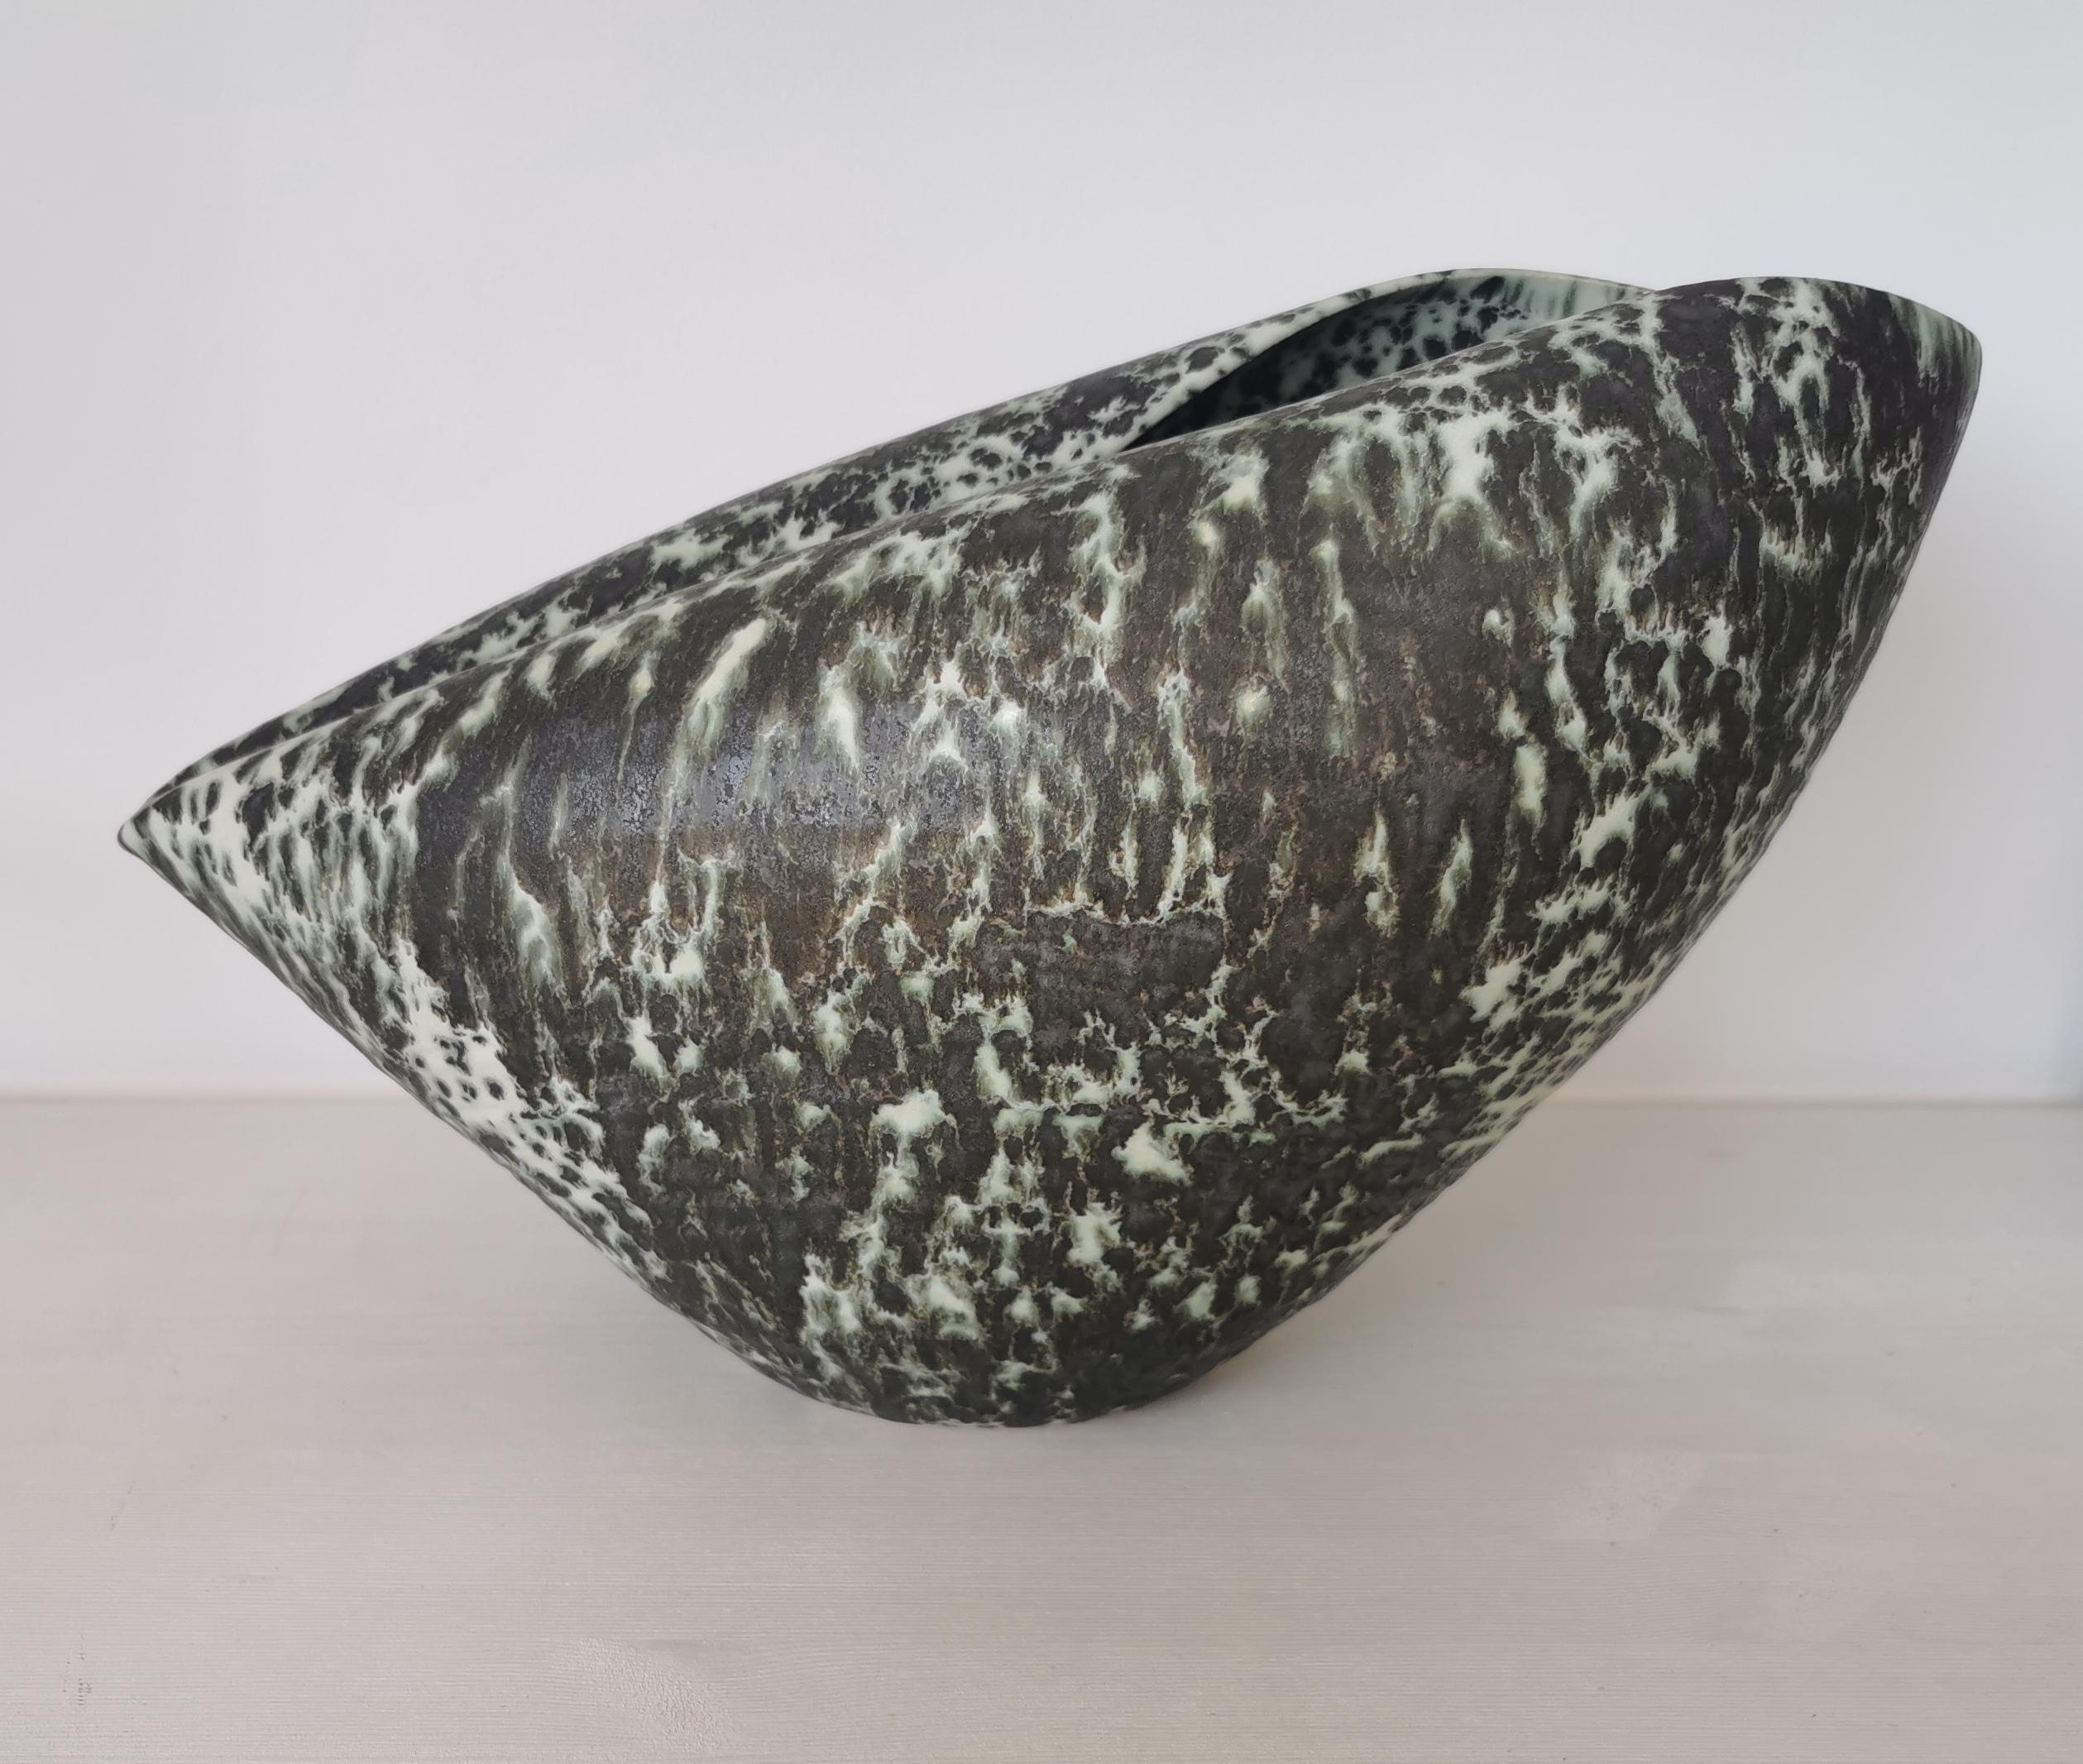 Oval Form with Green and Black Speckled Glaze, Vessel No.98, Ceramic Sculpture In New Condition For Sale In London, GB